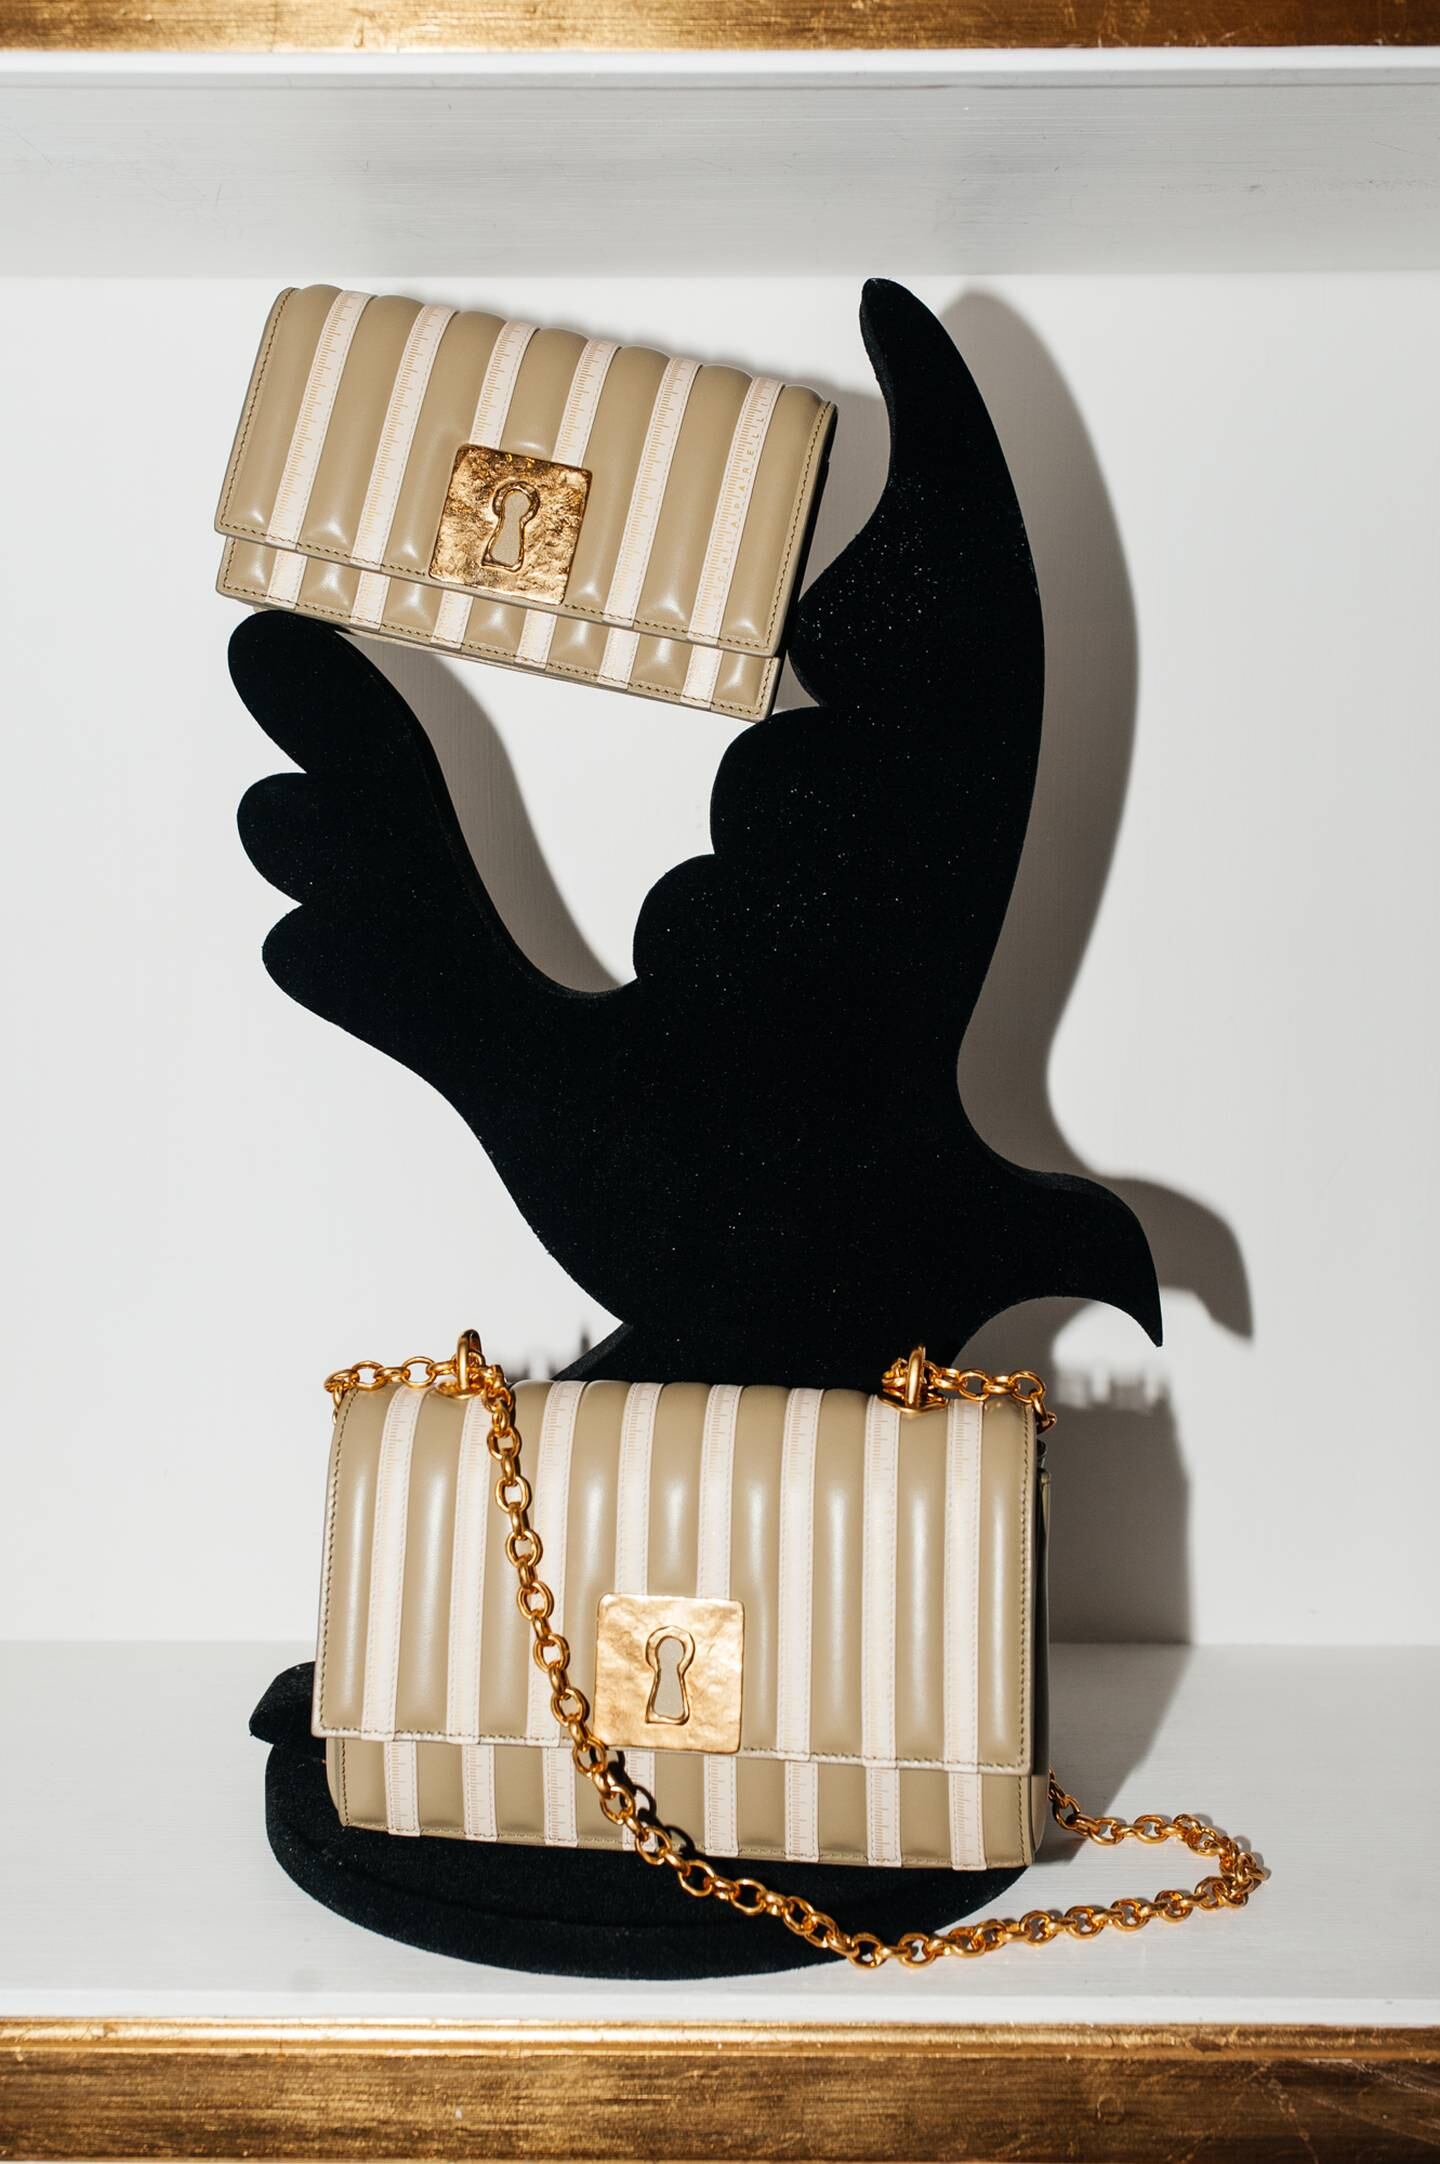 Keyholes and almost cast bronze are key symbols of the Schiaparelli revival, as seen in the new brand "Schlapp" bag.